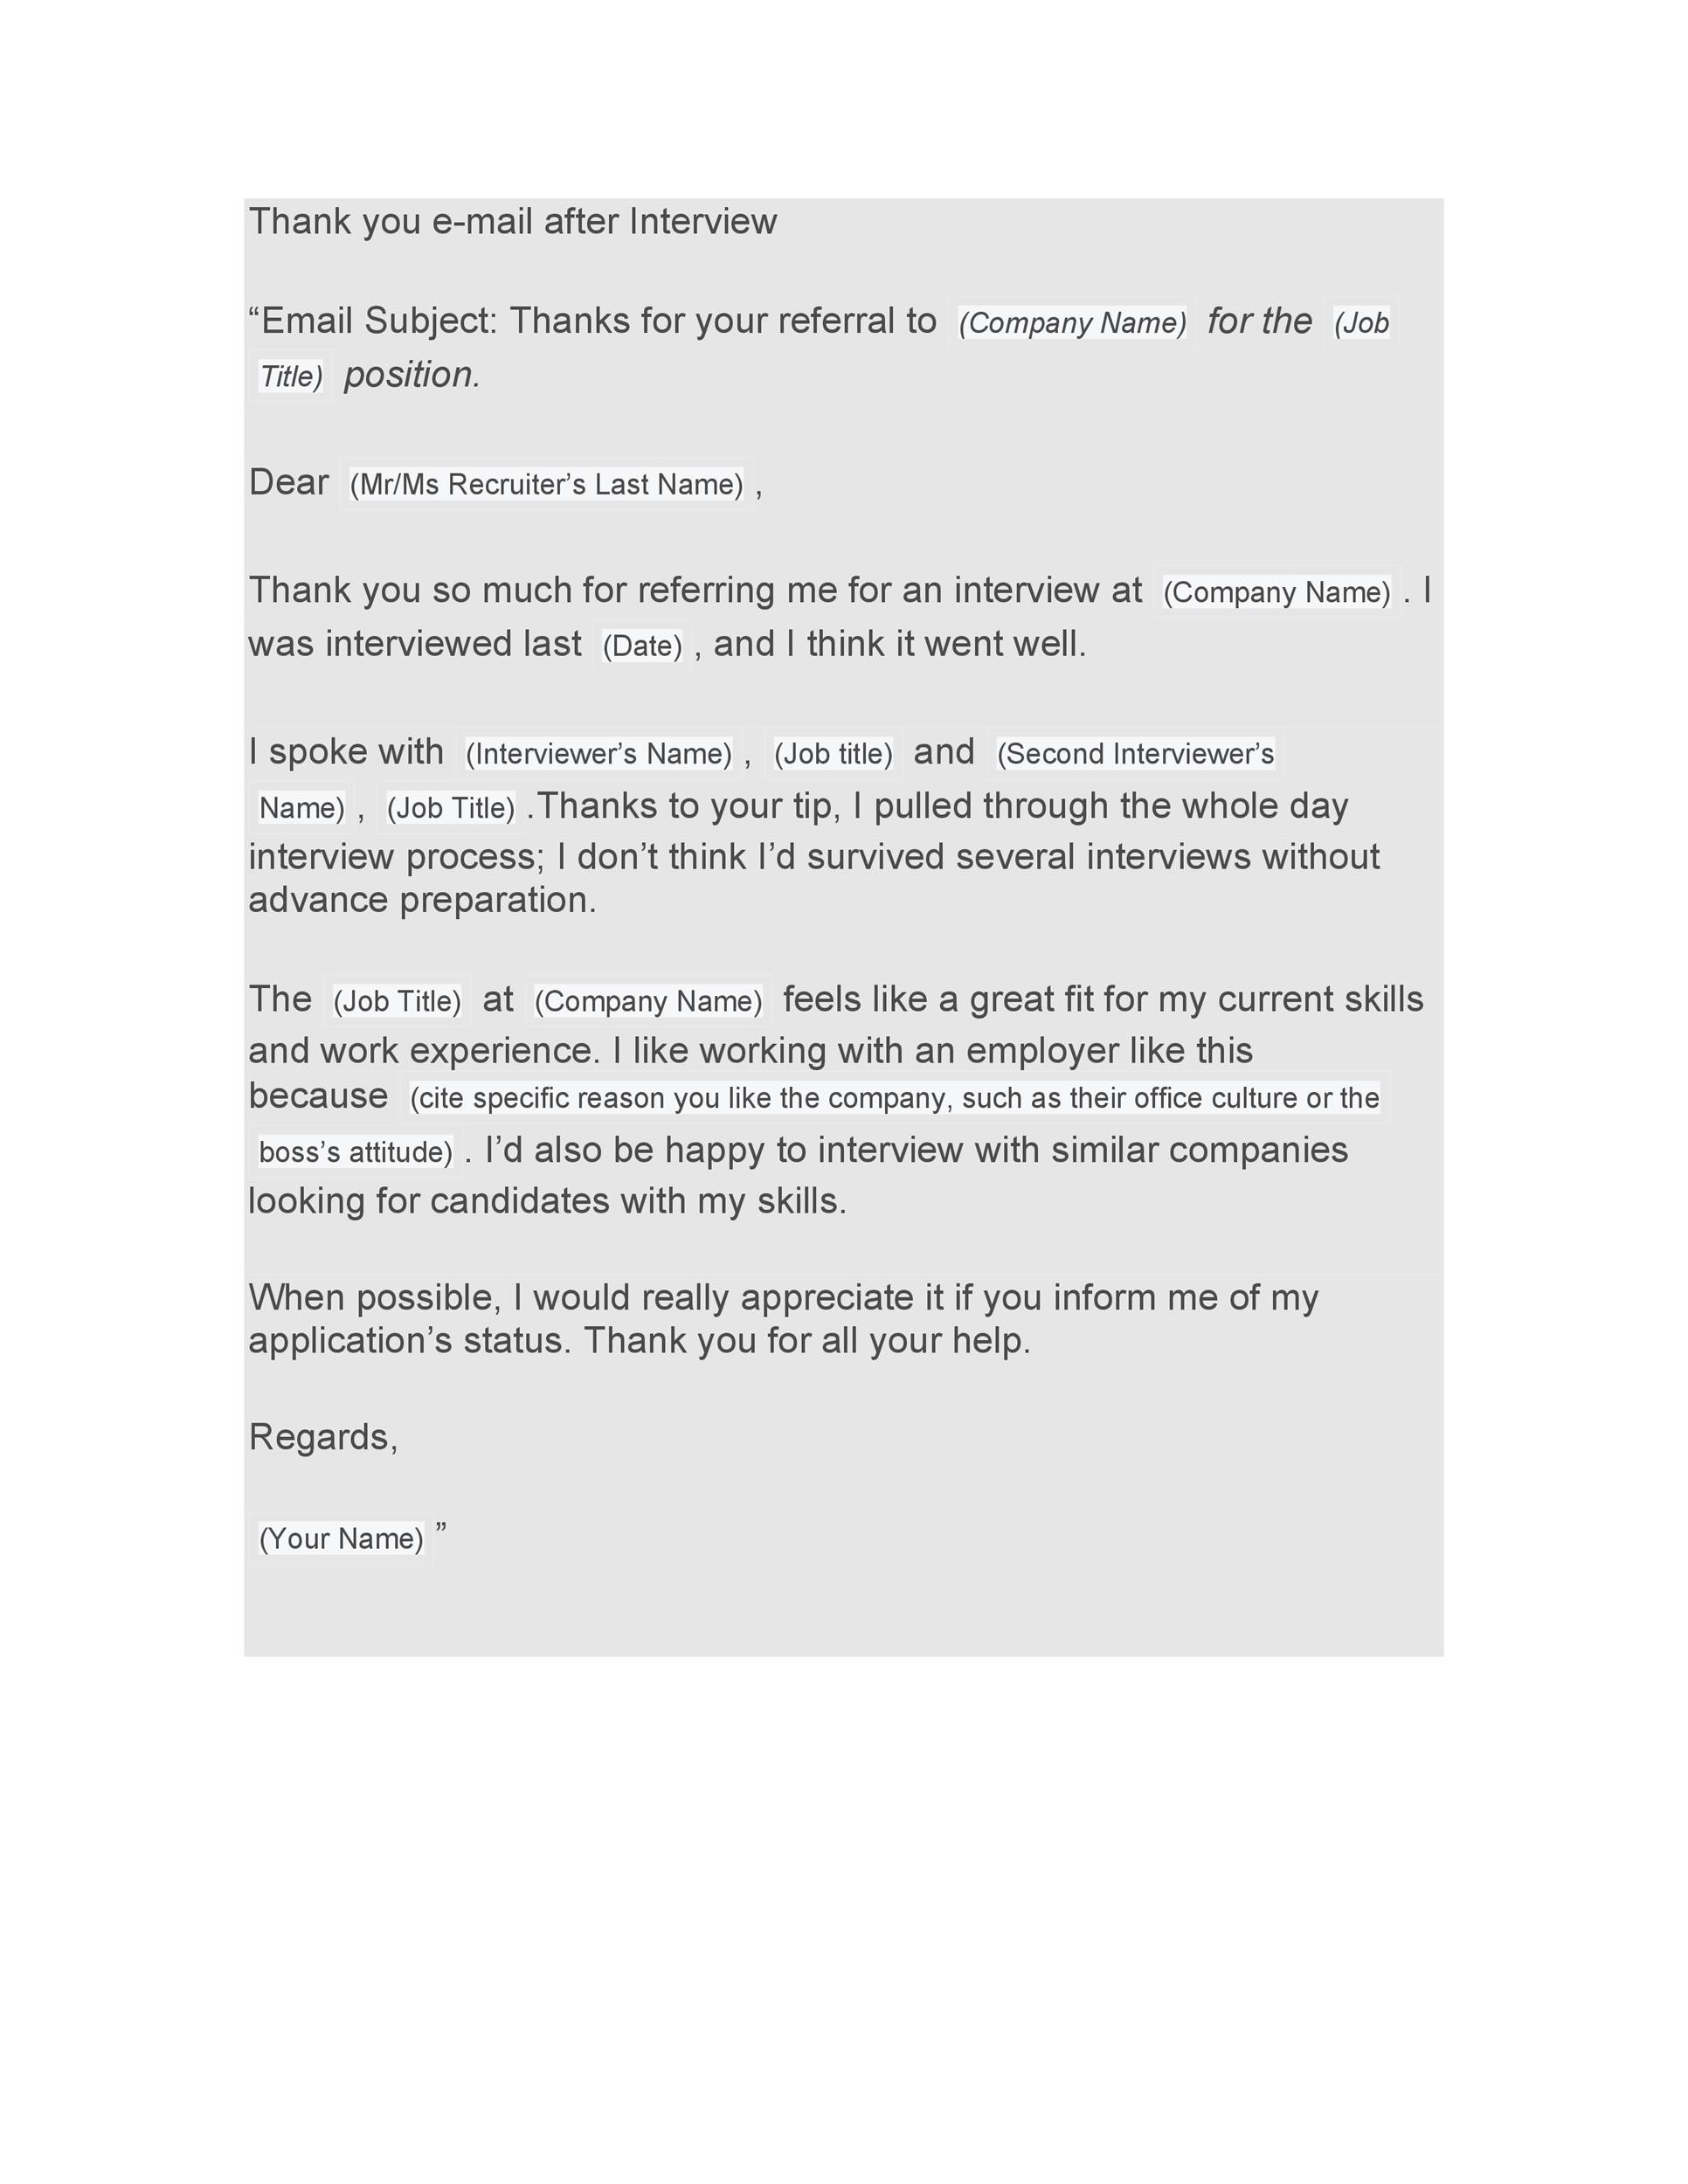 Free Thank you e-mail after Interview Template 18